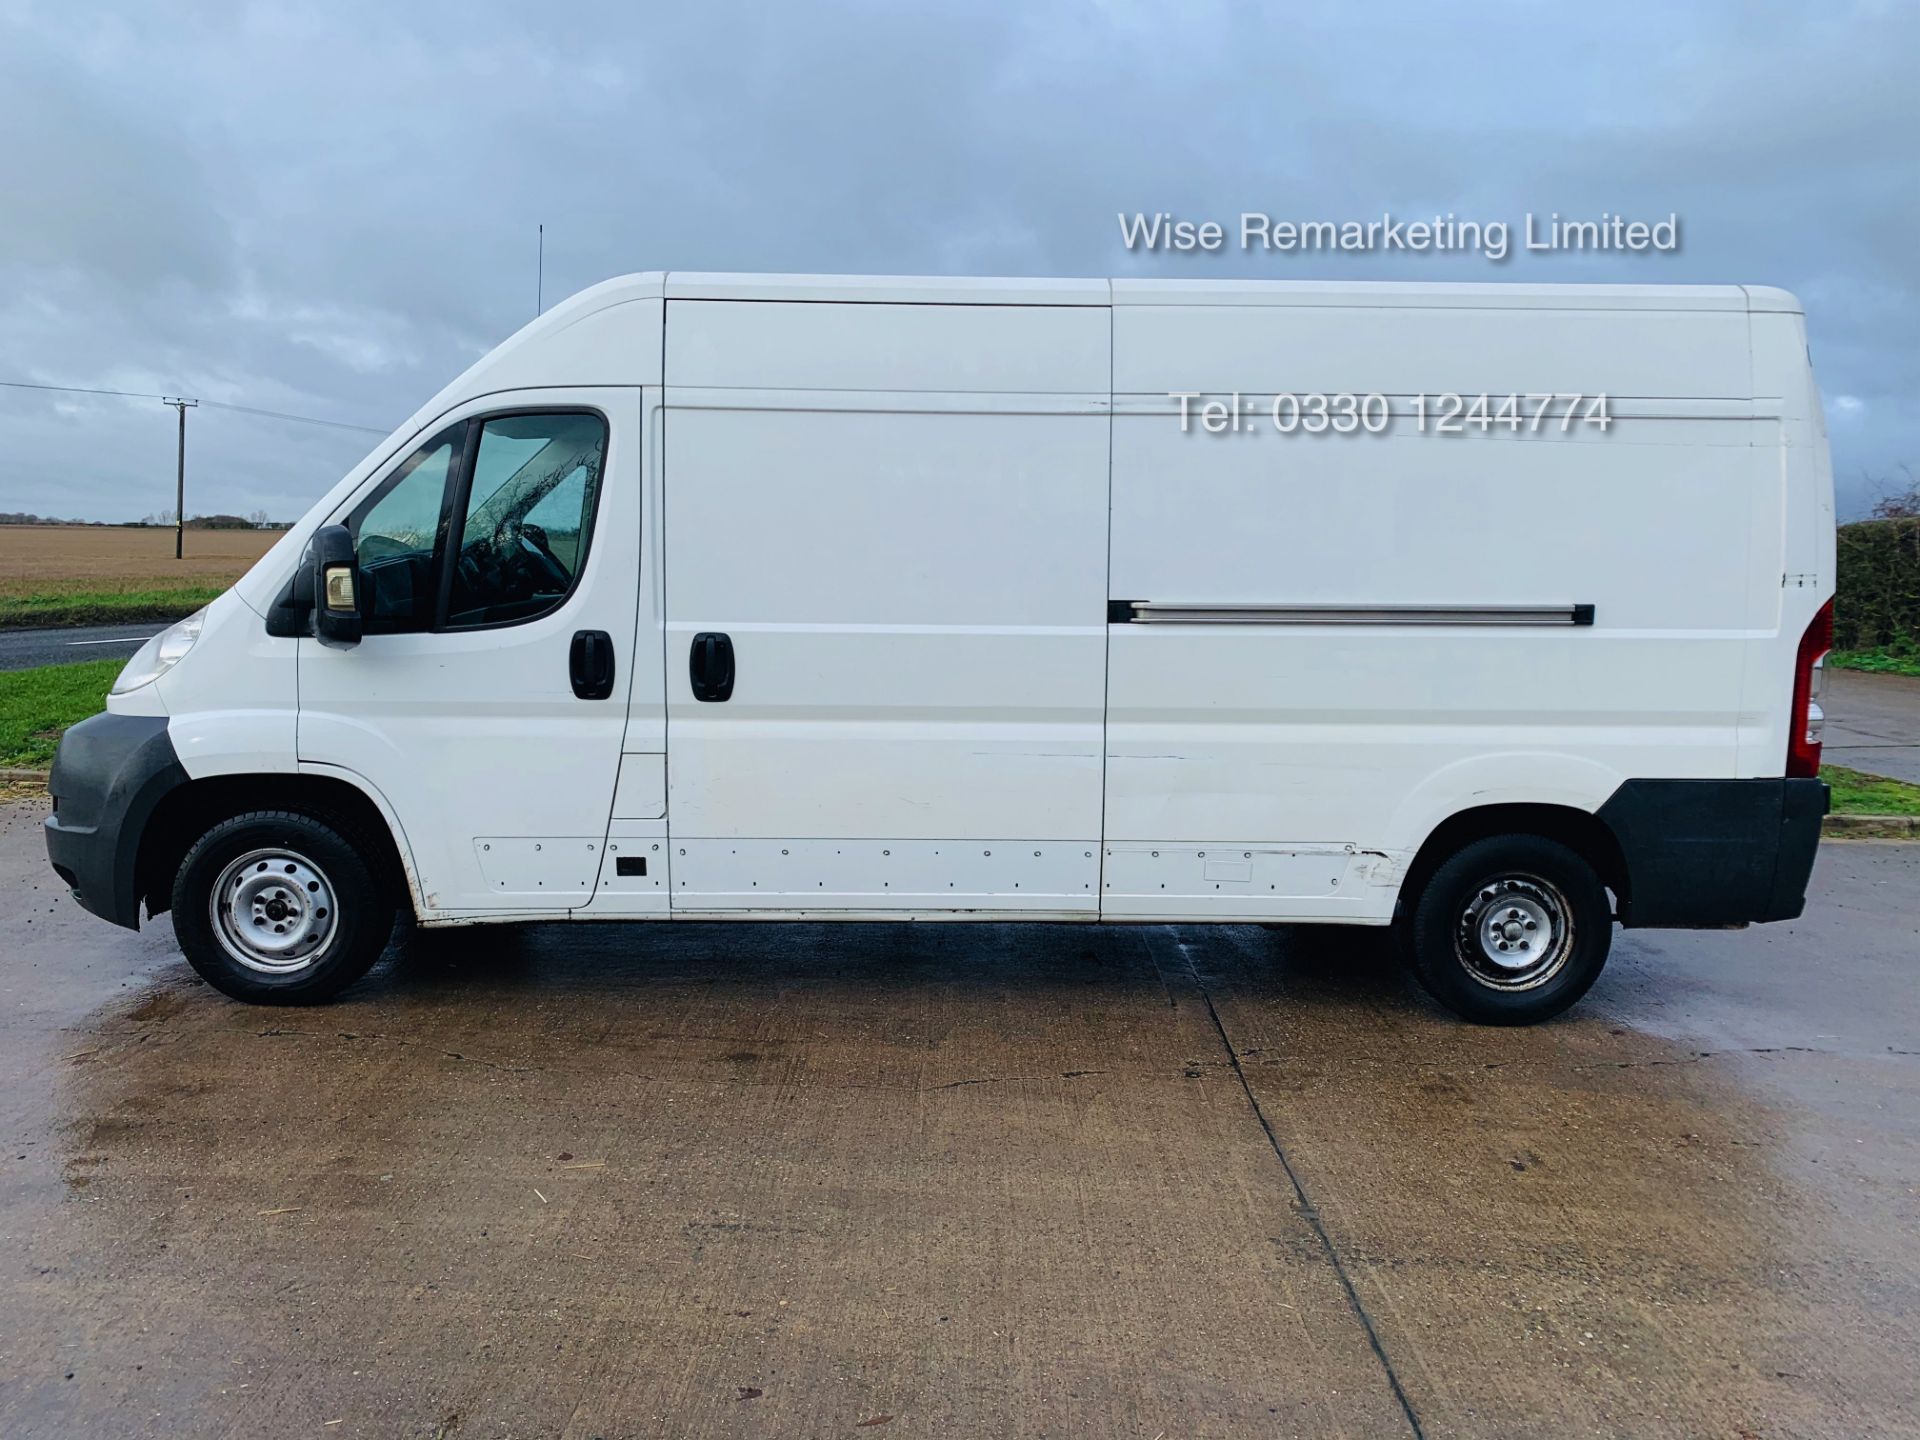 Peugeot Boxer 335 2.2 HDi Long Wheel Base( L3H2) 2014 Model - 1 Keeper From New - Image 2 of 17